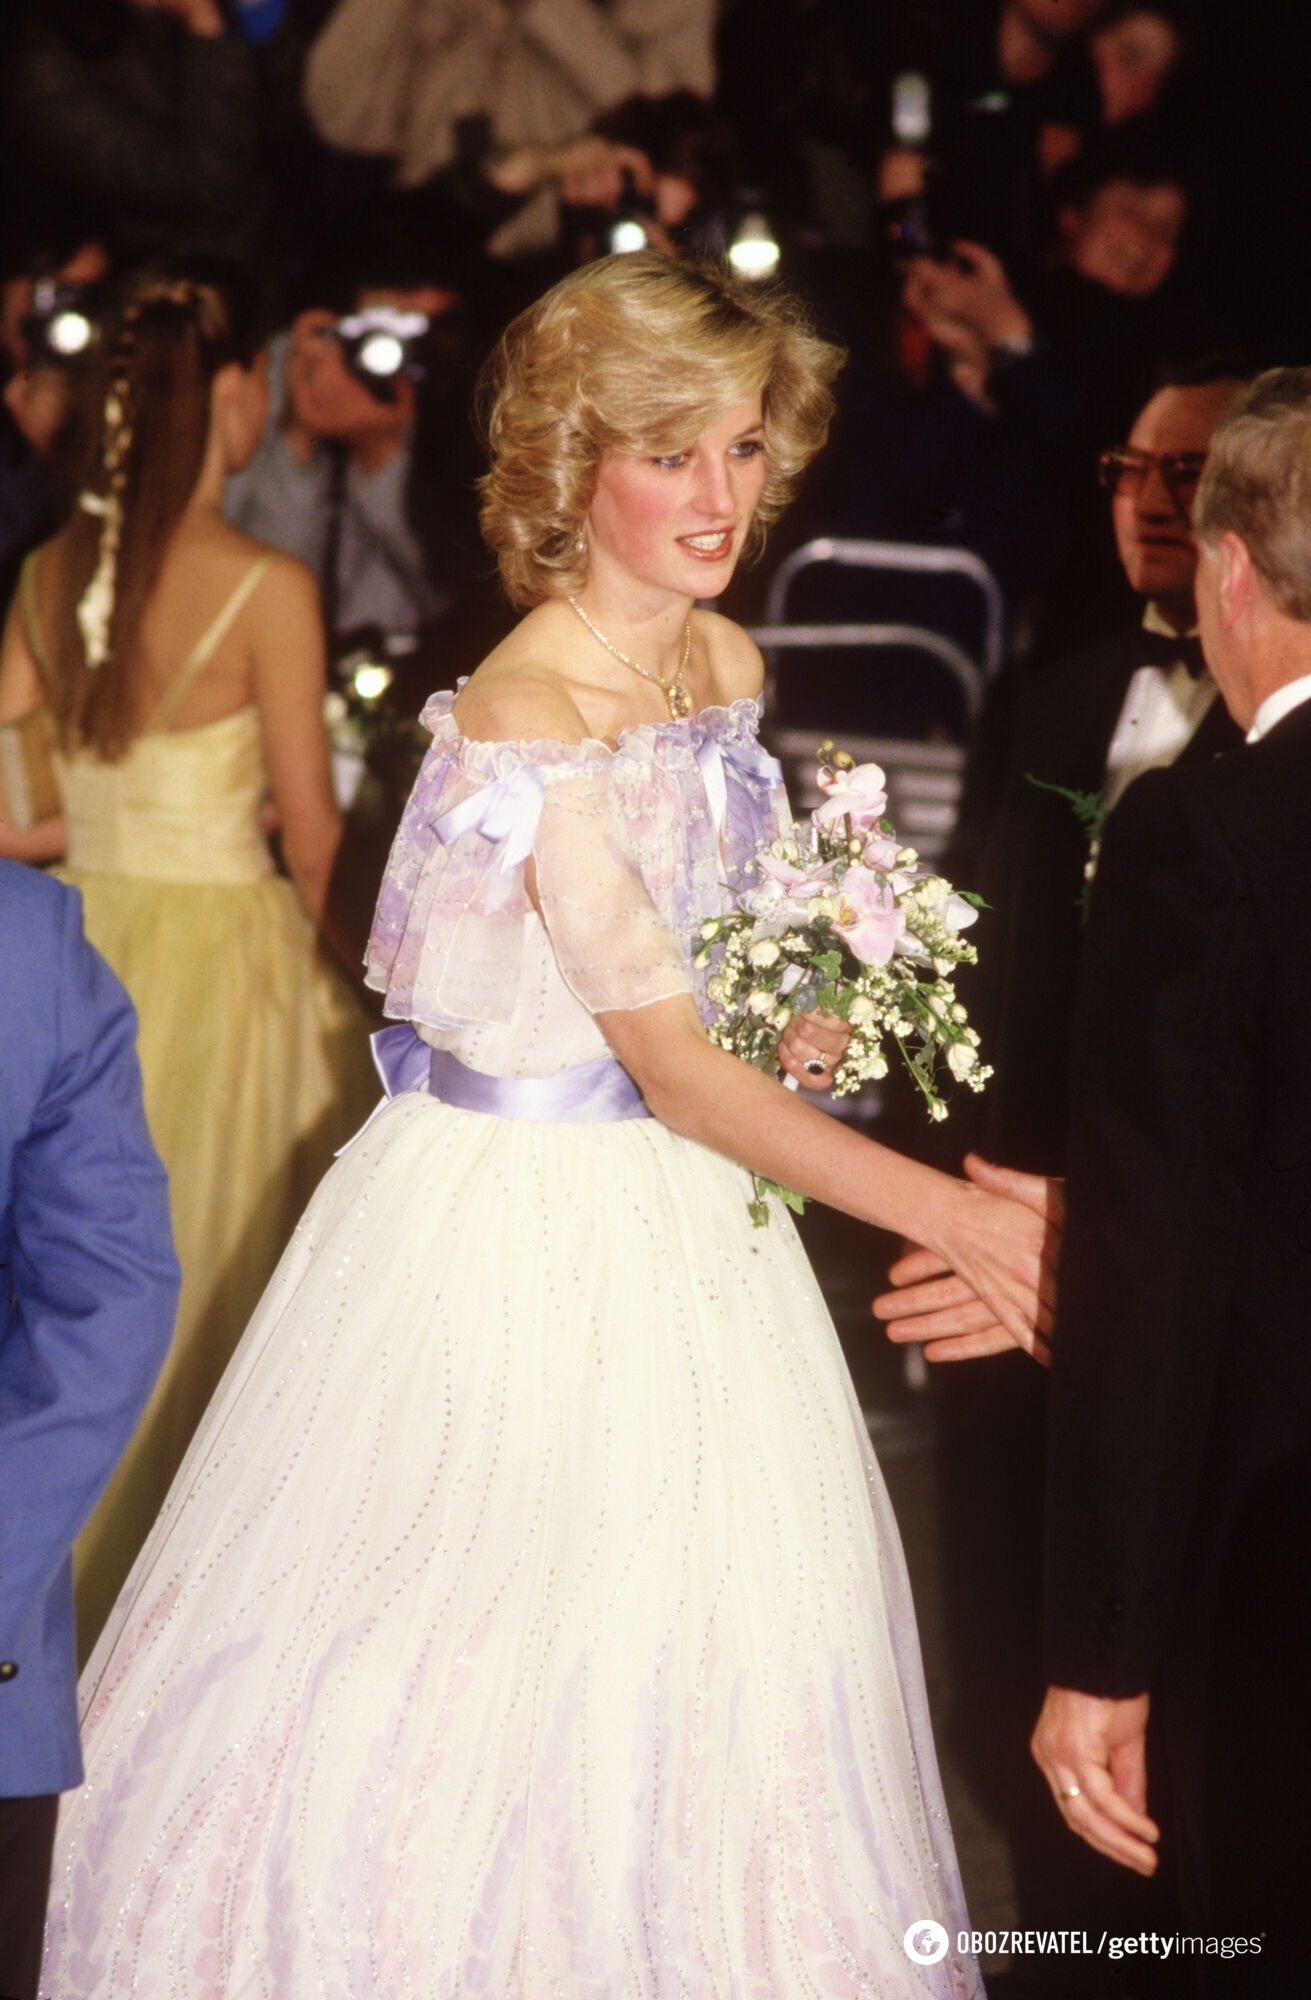 Video of Princess Diana's meeting with ''Mr. Bean'' in 1984 touched the network